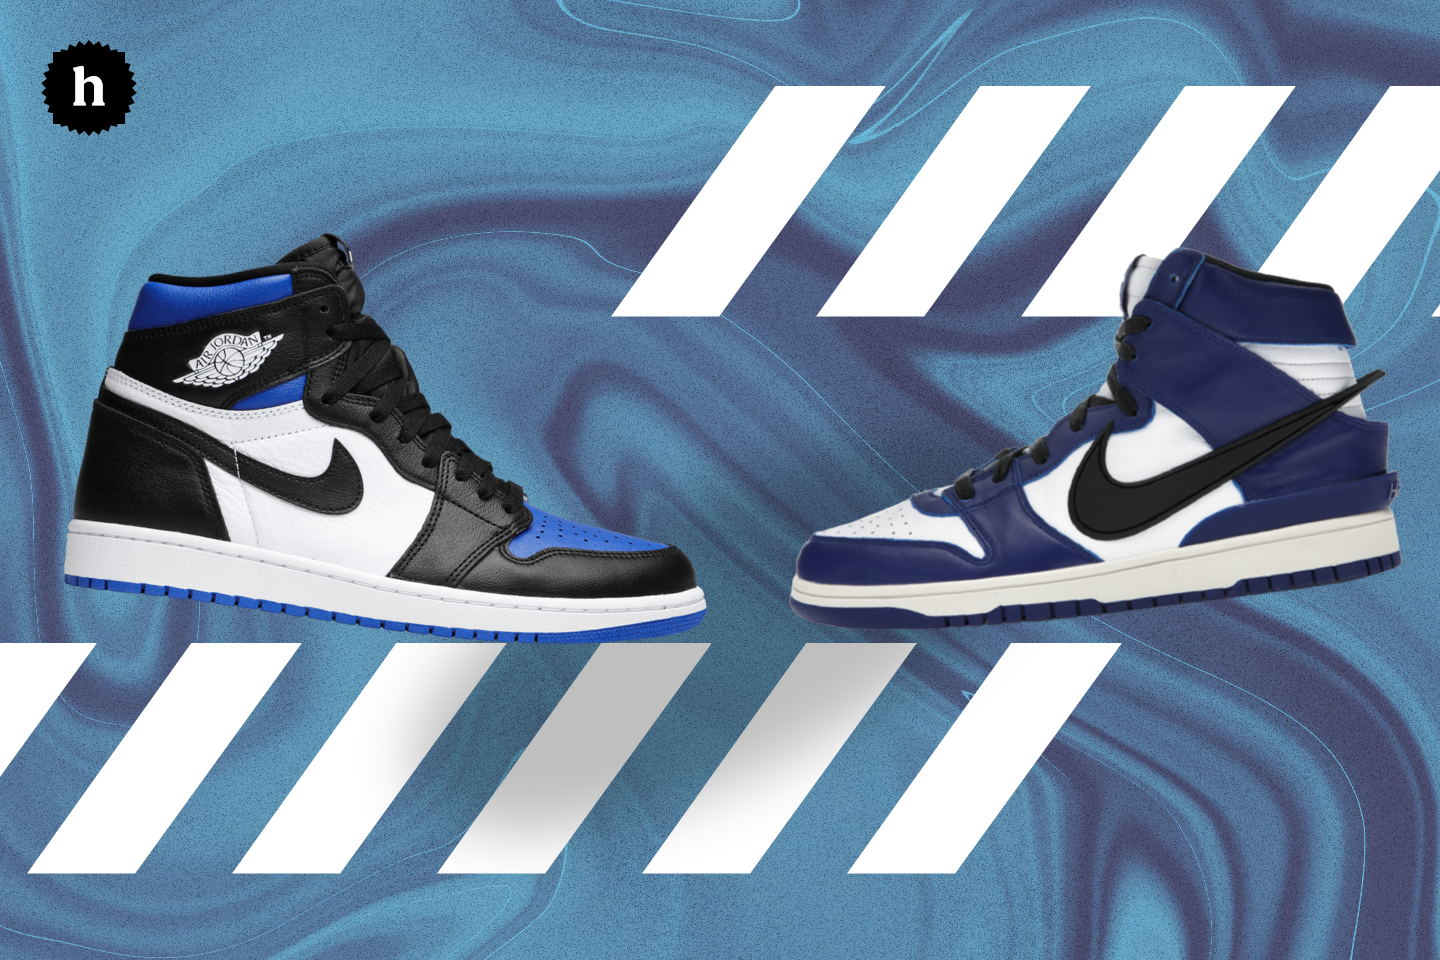 dunks compared to jordan 1